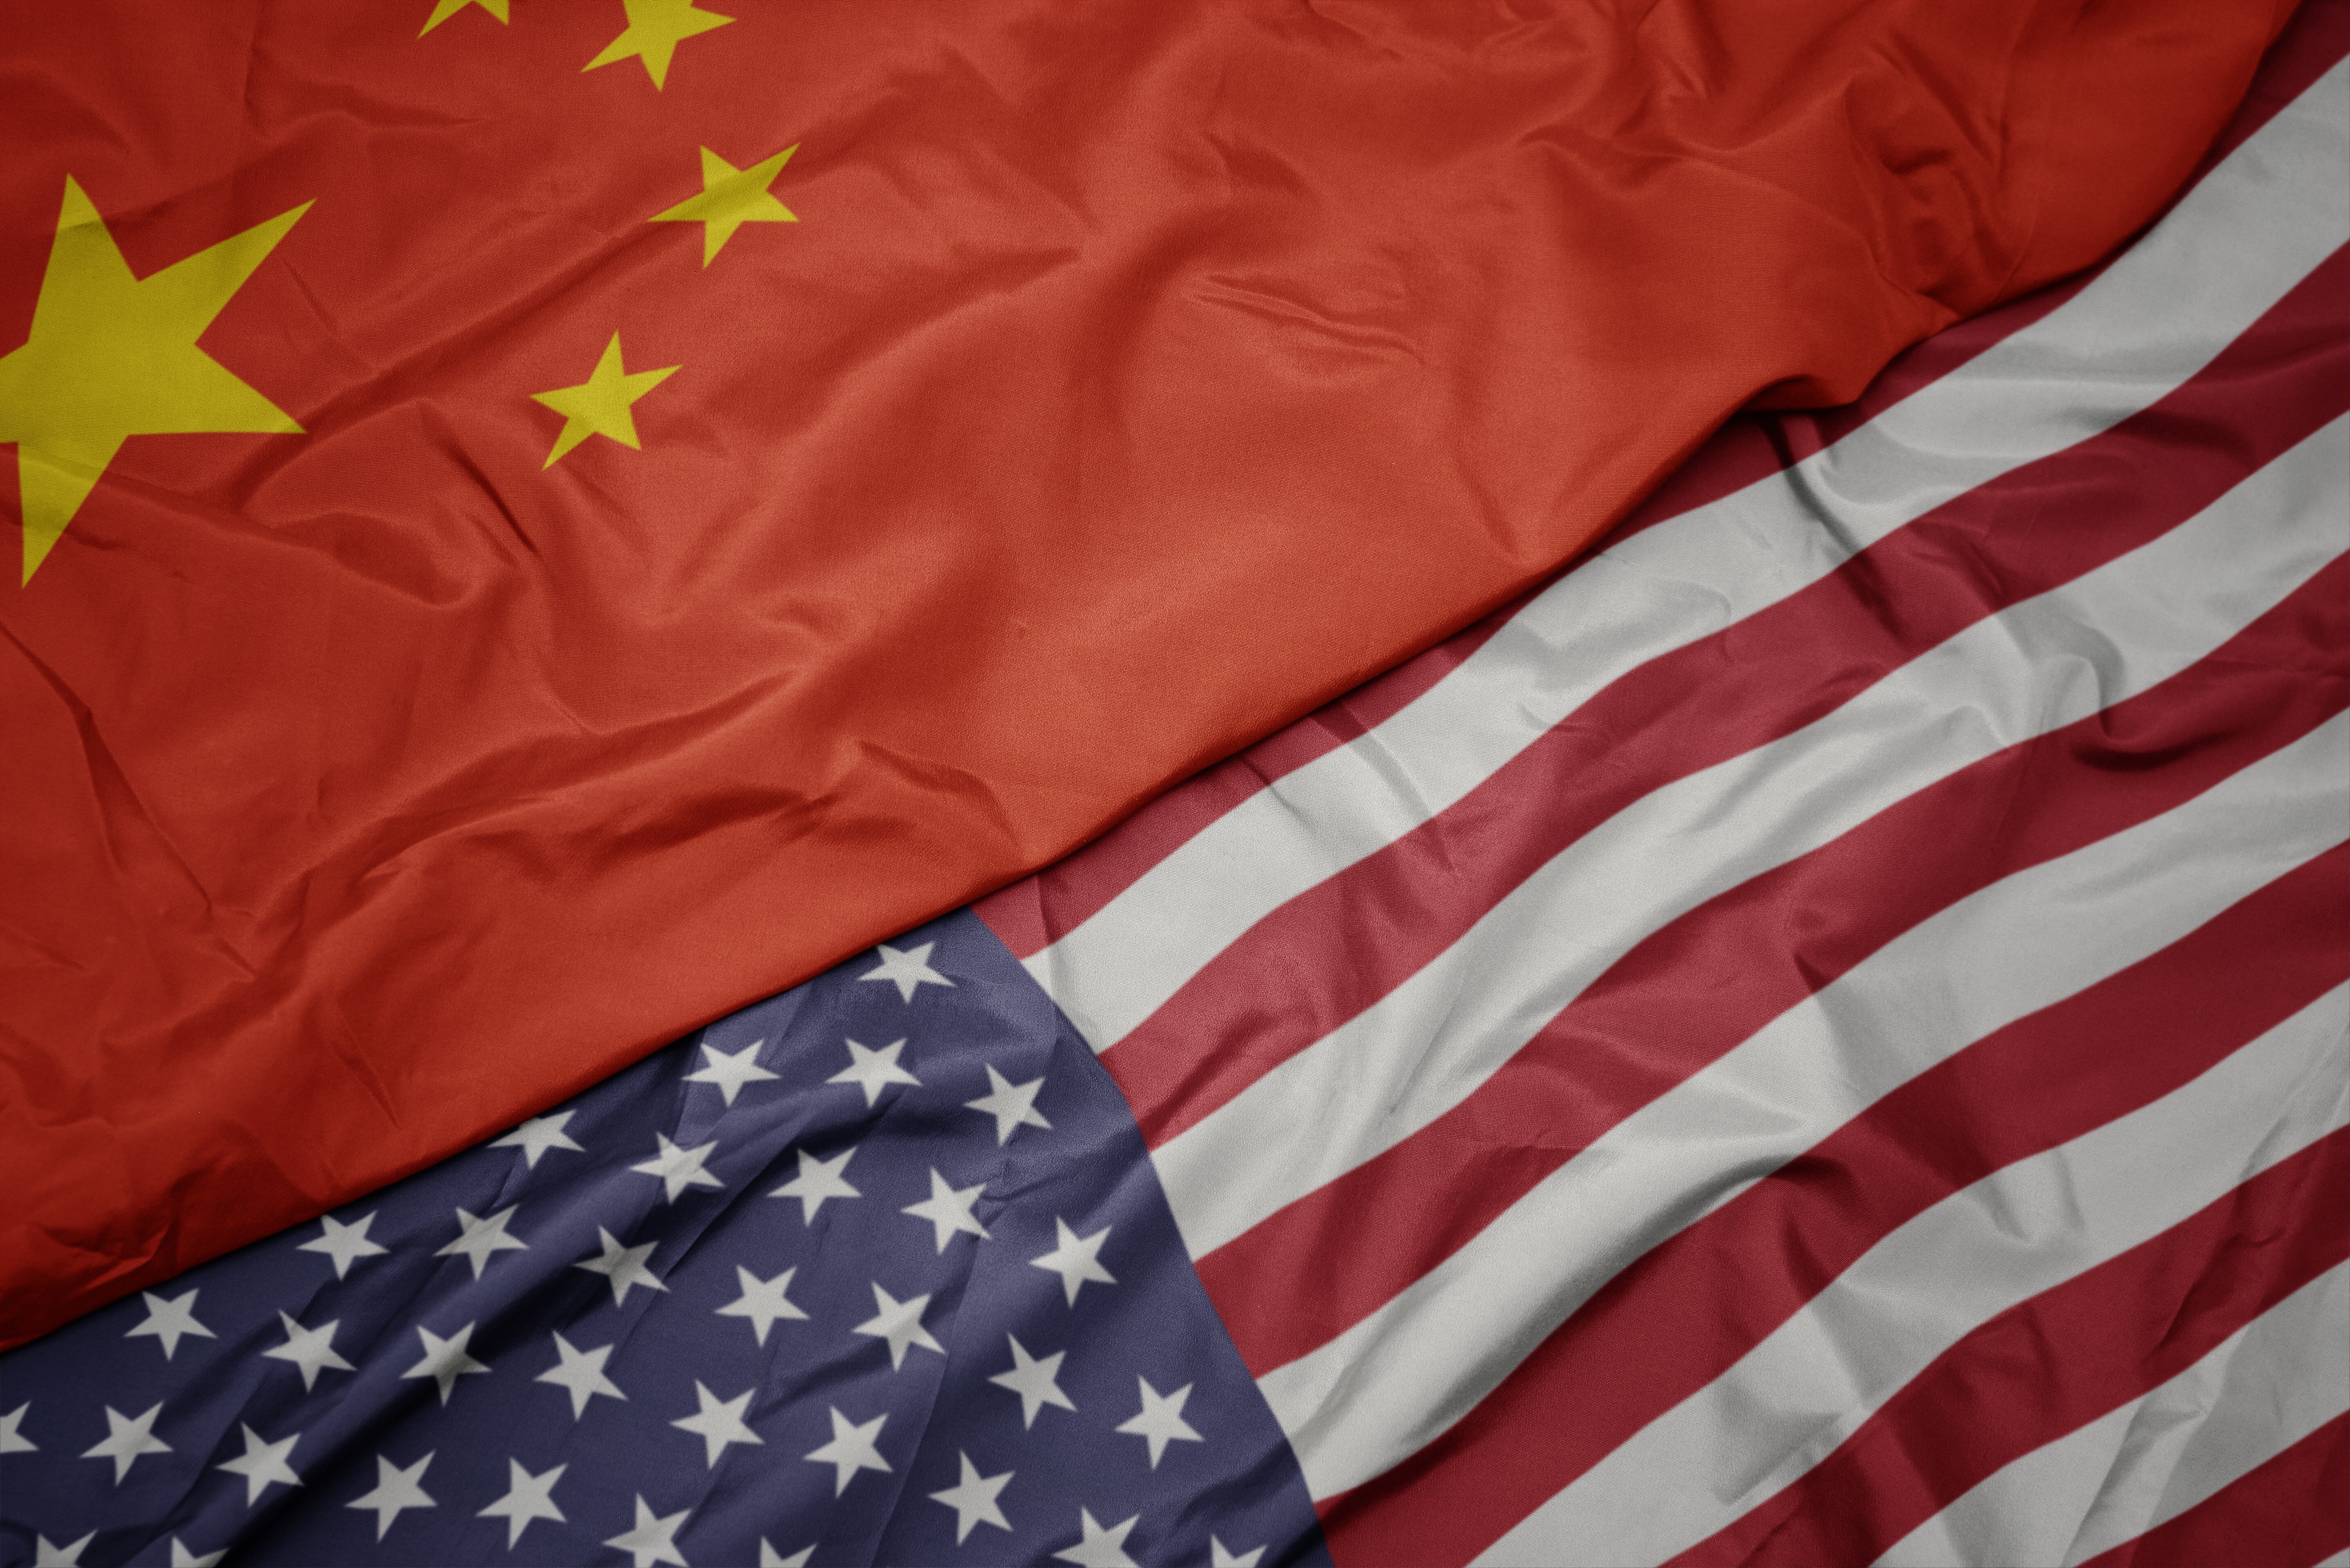 The US is the biggest external threat to China’s development, the NDRC says. Photo: Shutterstock